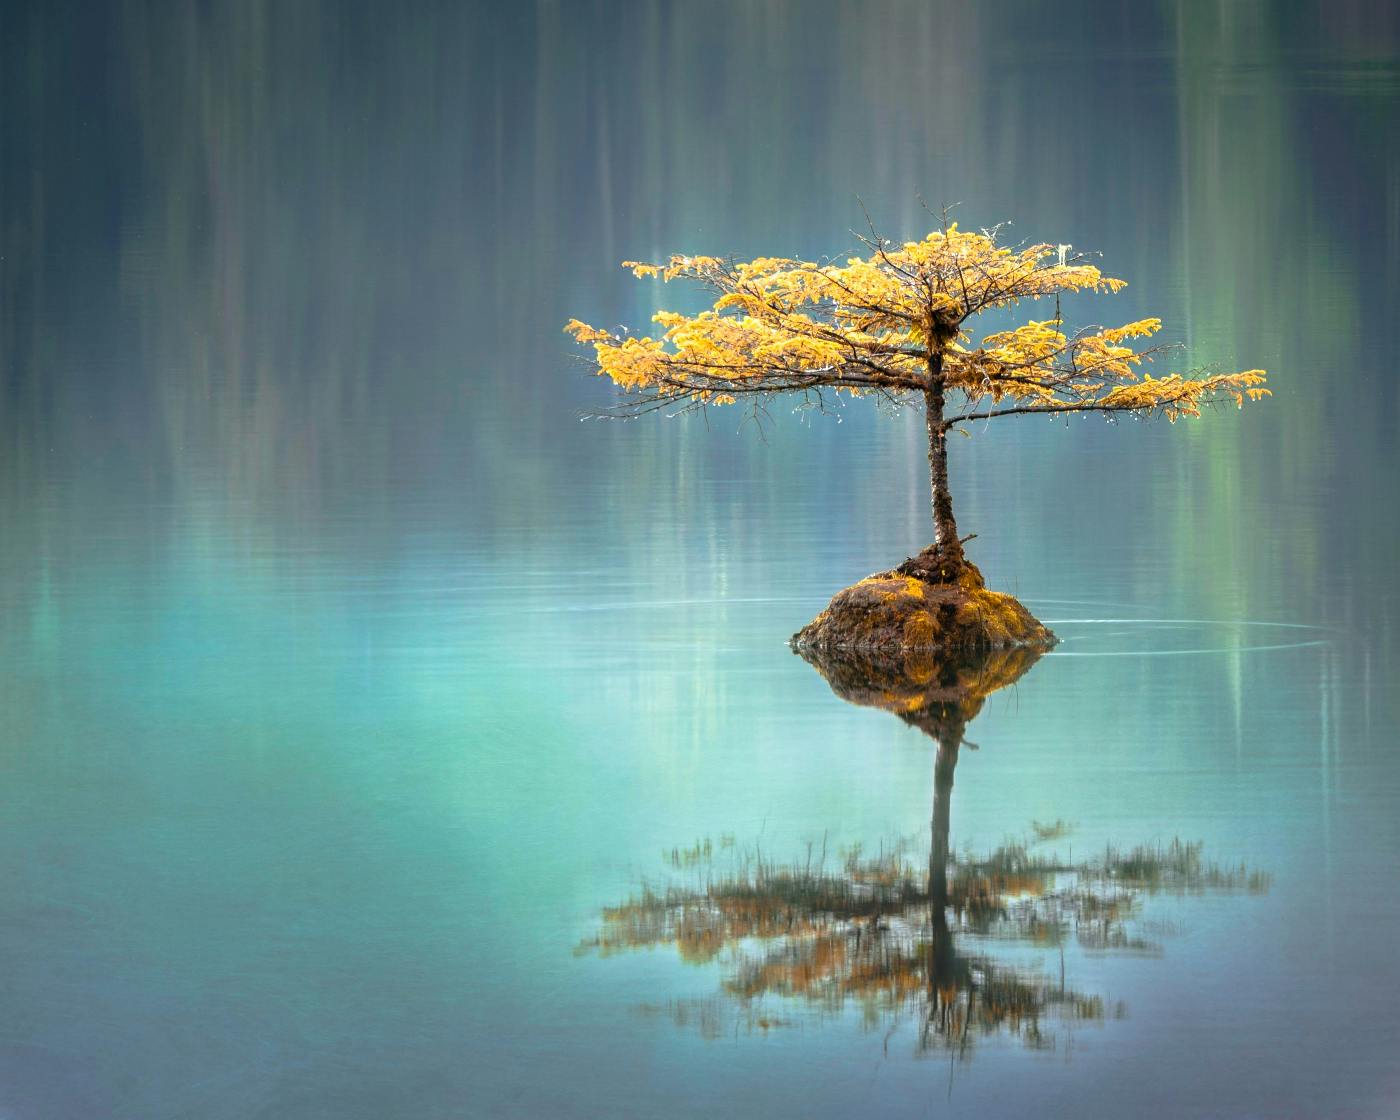 A tree on a tiny island being reflected in the water.